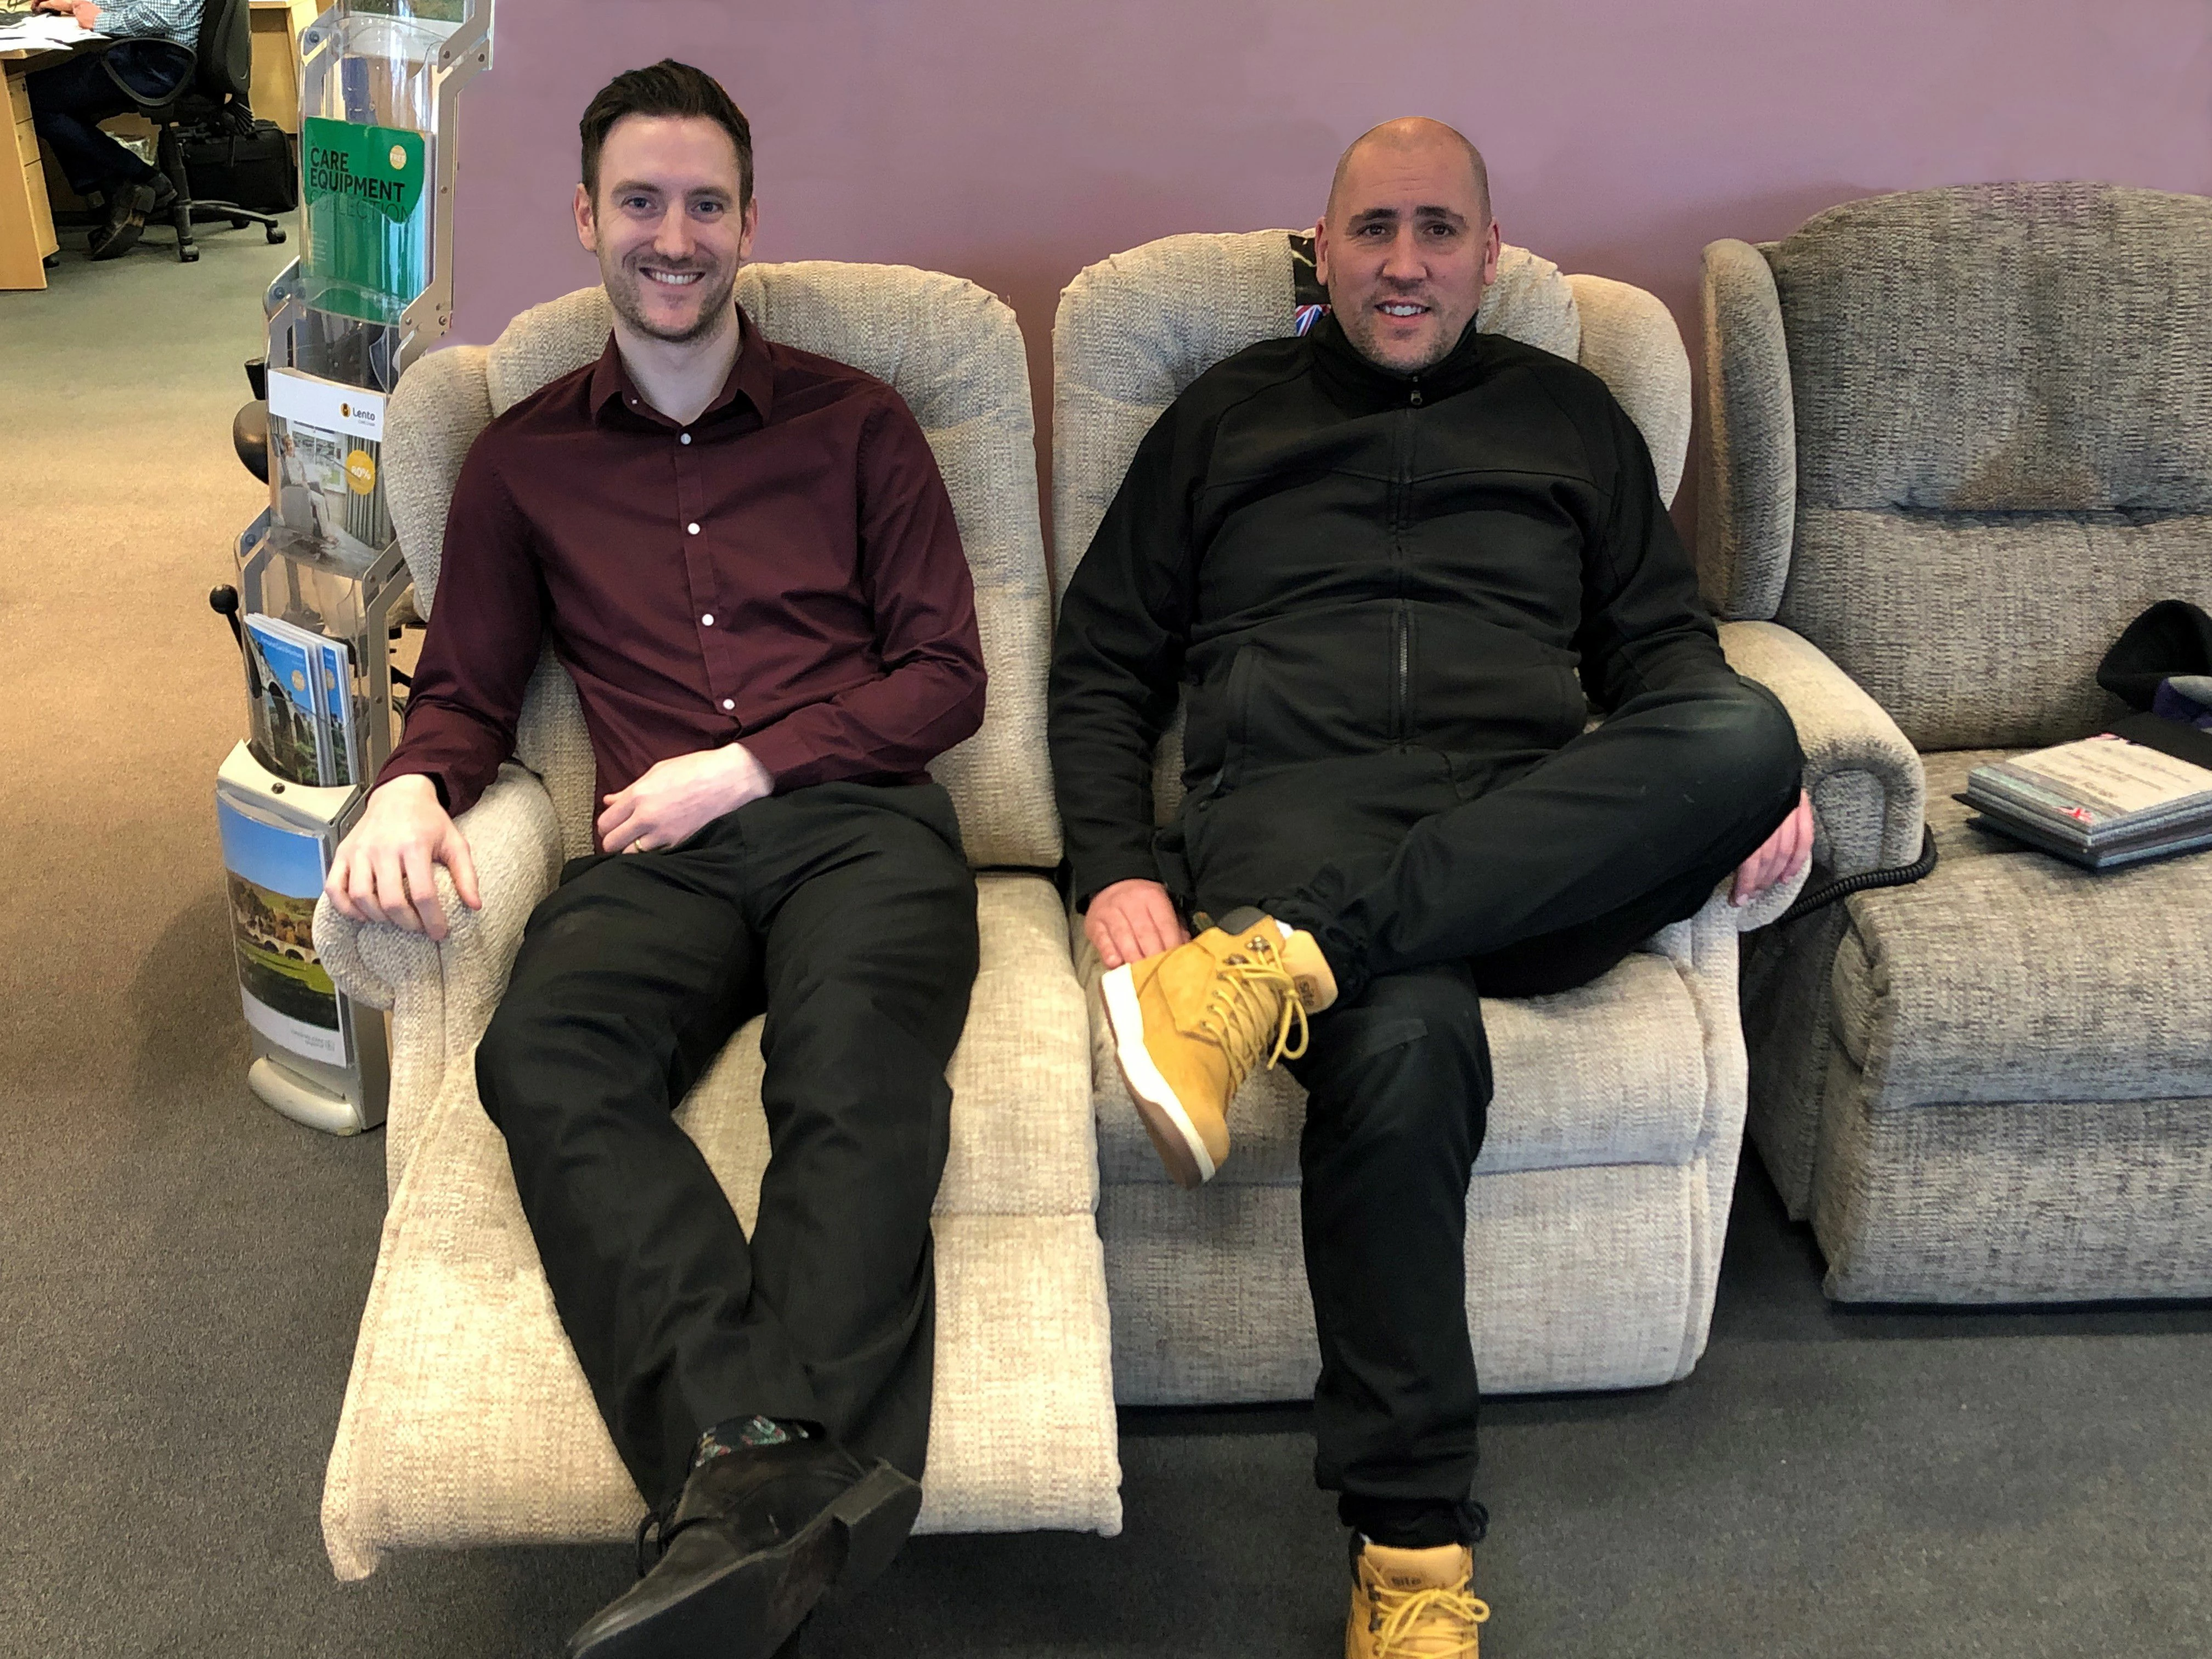 Ben and Miles putting their feet up in the Yorkshire Care showroom.